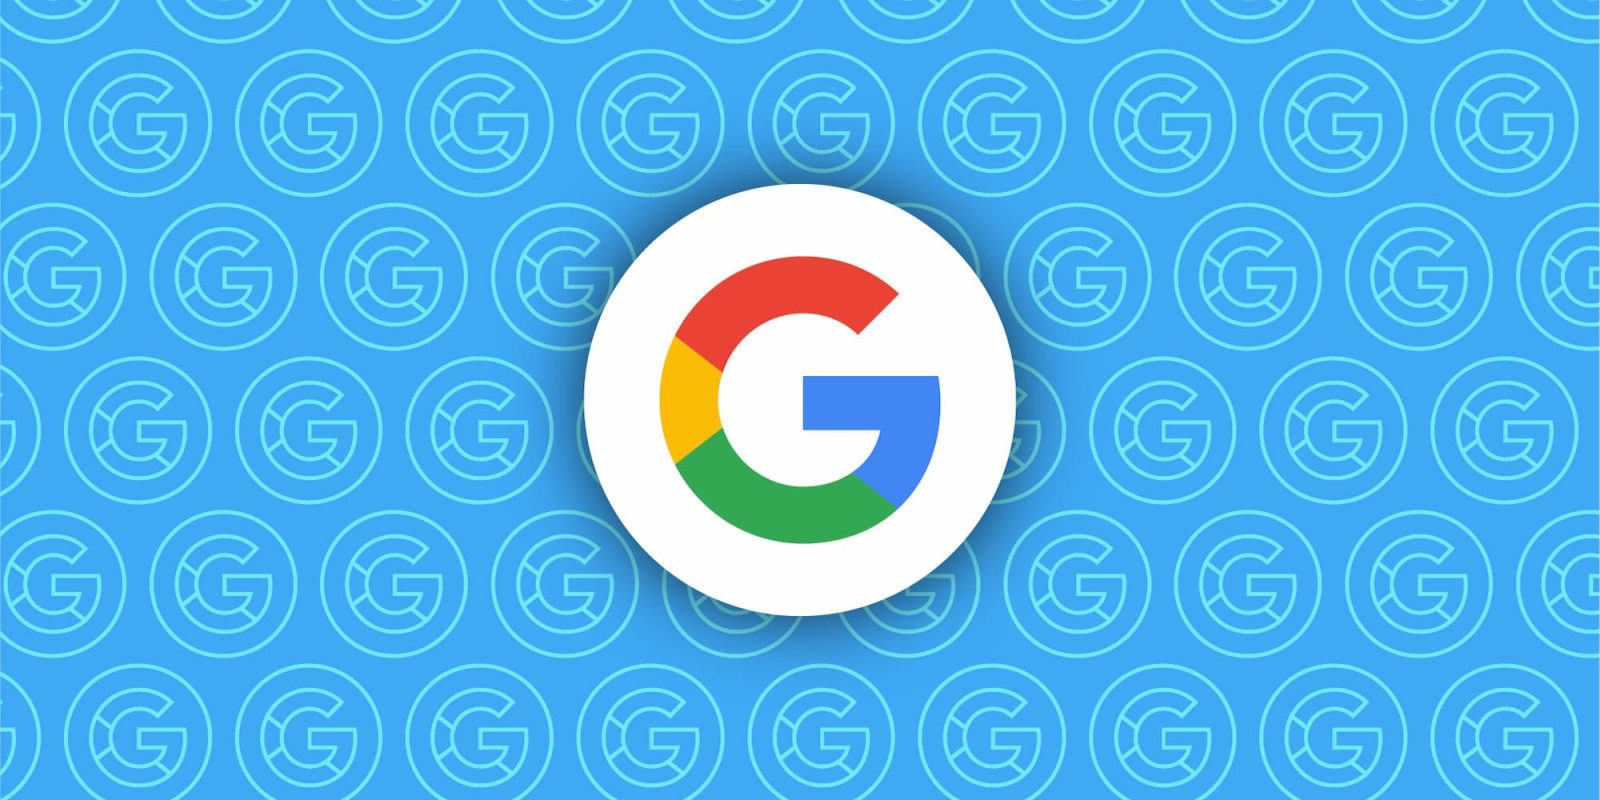 Google app is once again testing a bottom search bar redesign on Android